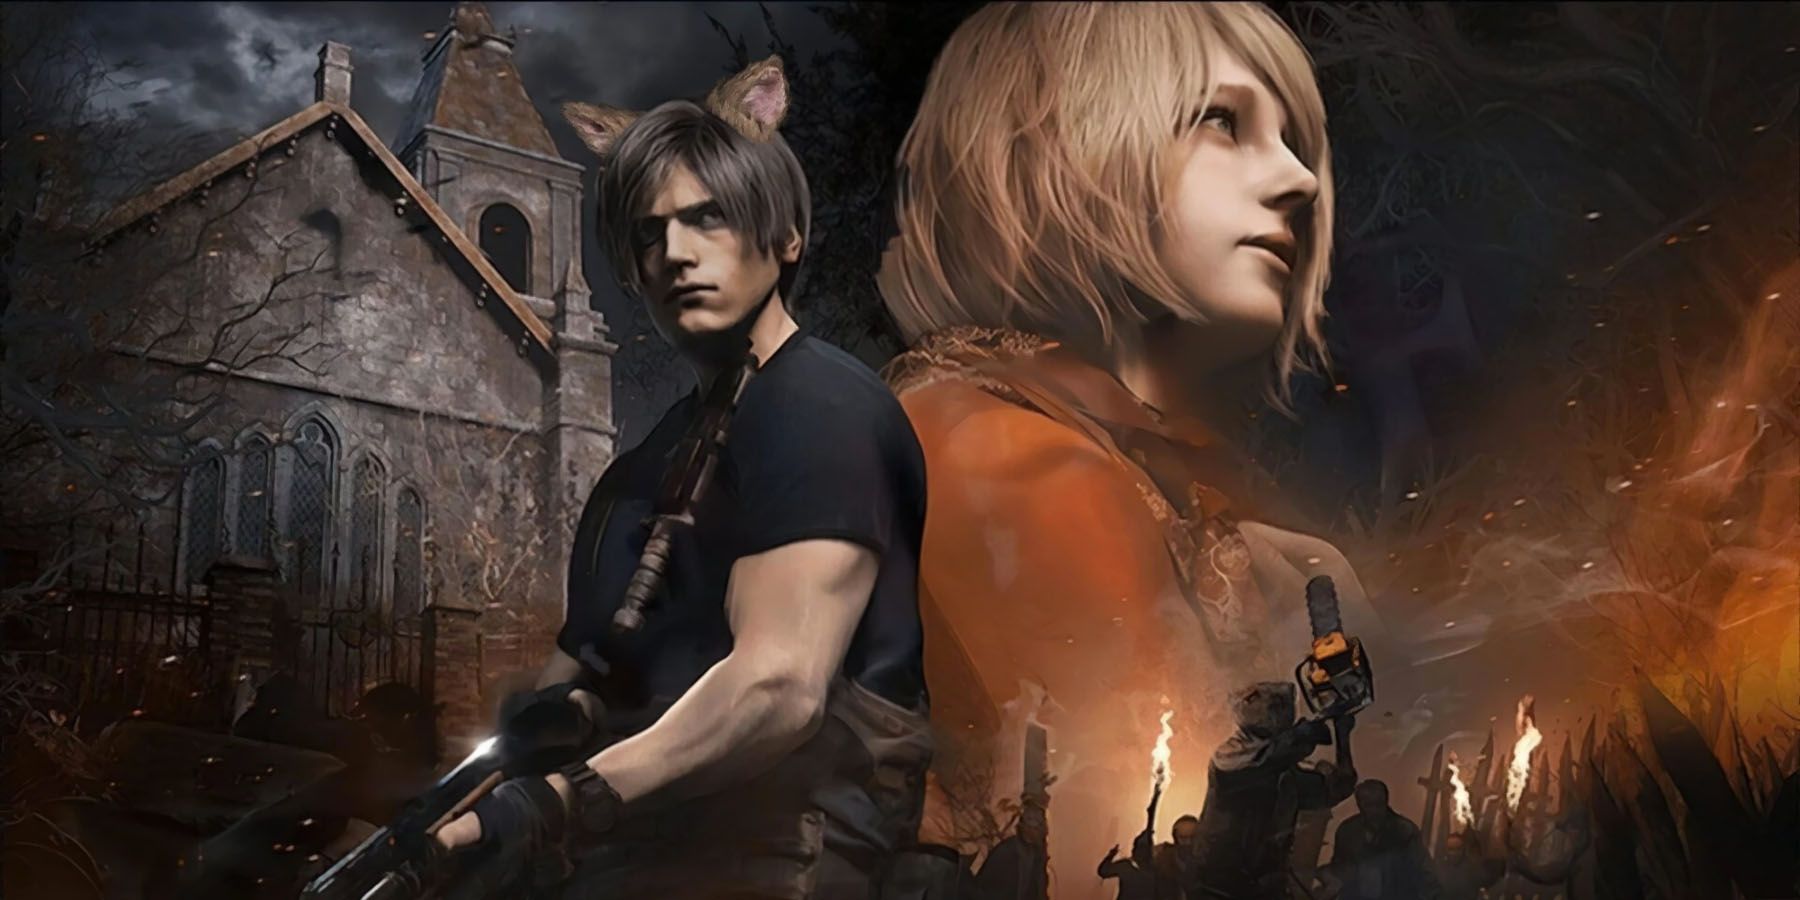 How to Speedrun the Resident Evil 4 Remake to Unlock Cat Ears and  Handcannon - LevelSkip